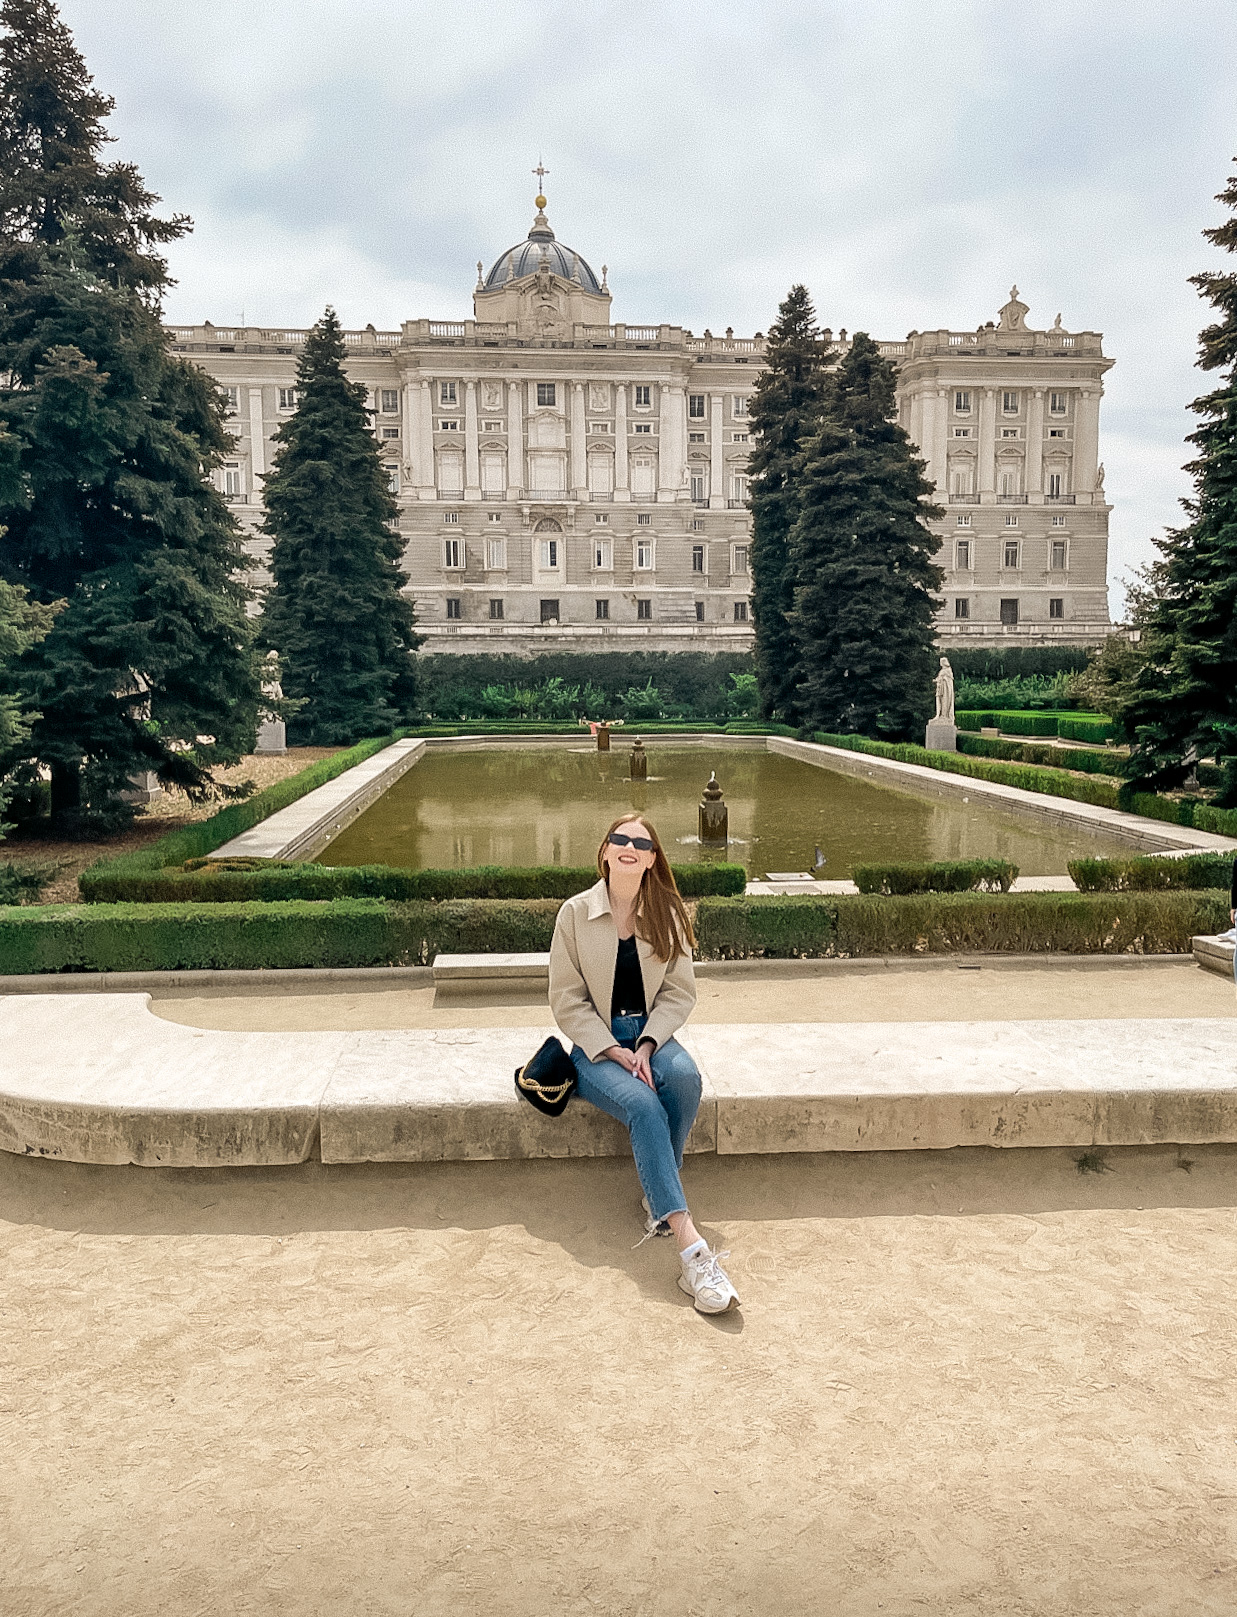 Instagrammable locations in Madrid Royal Palace